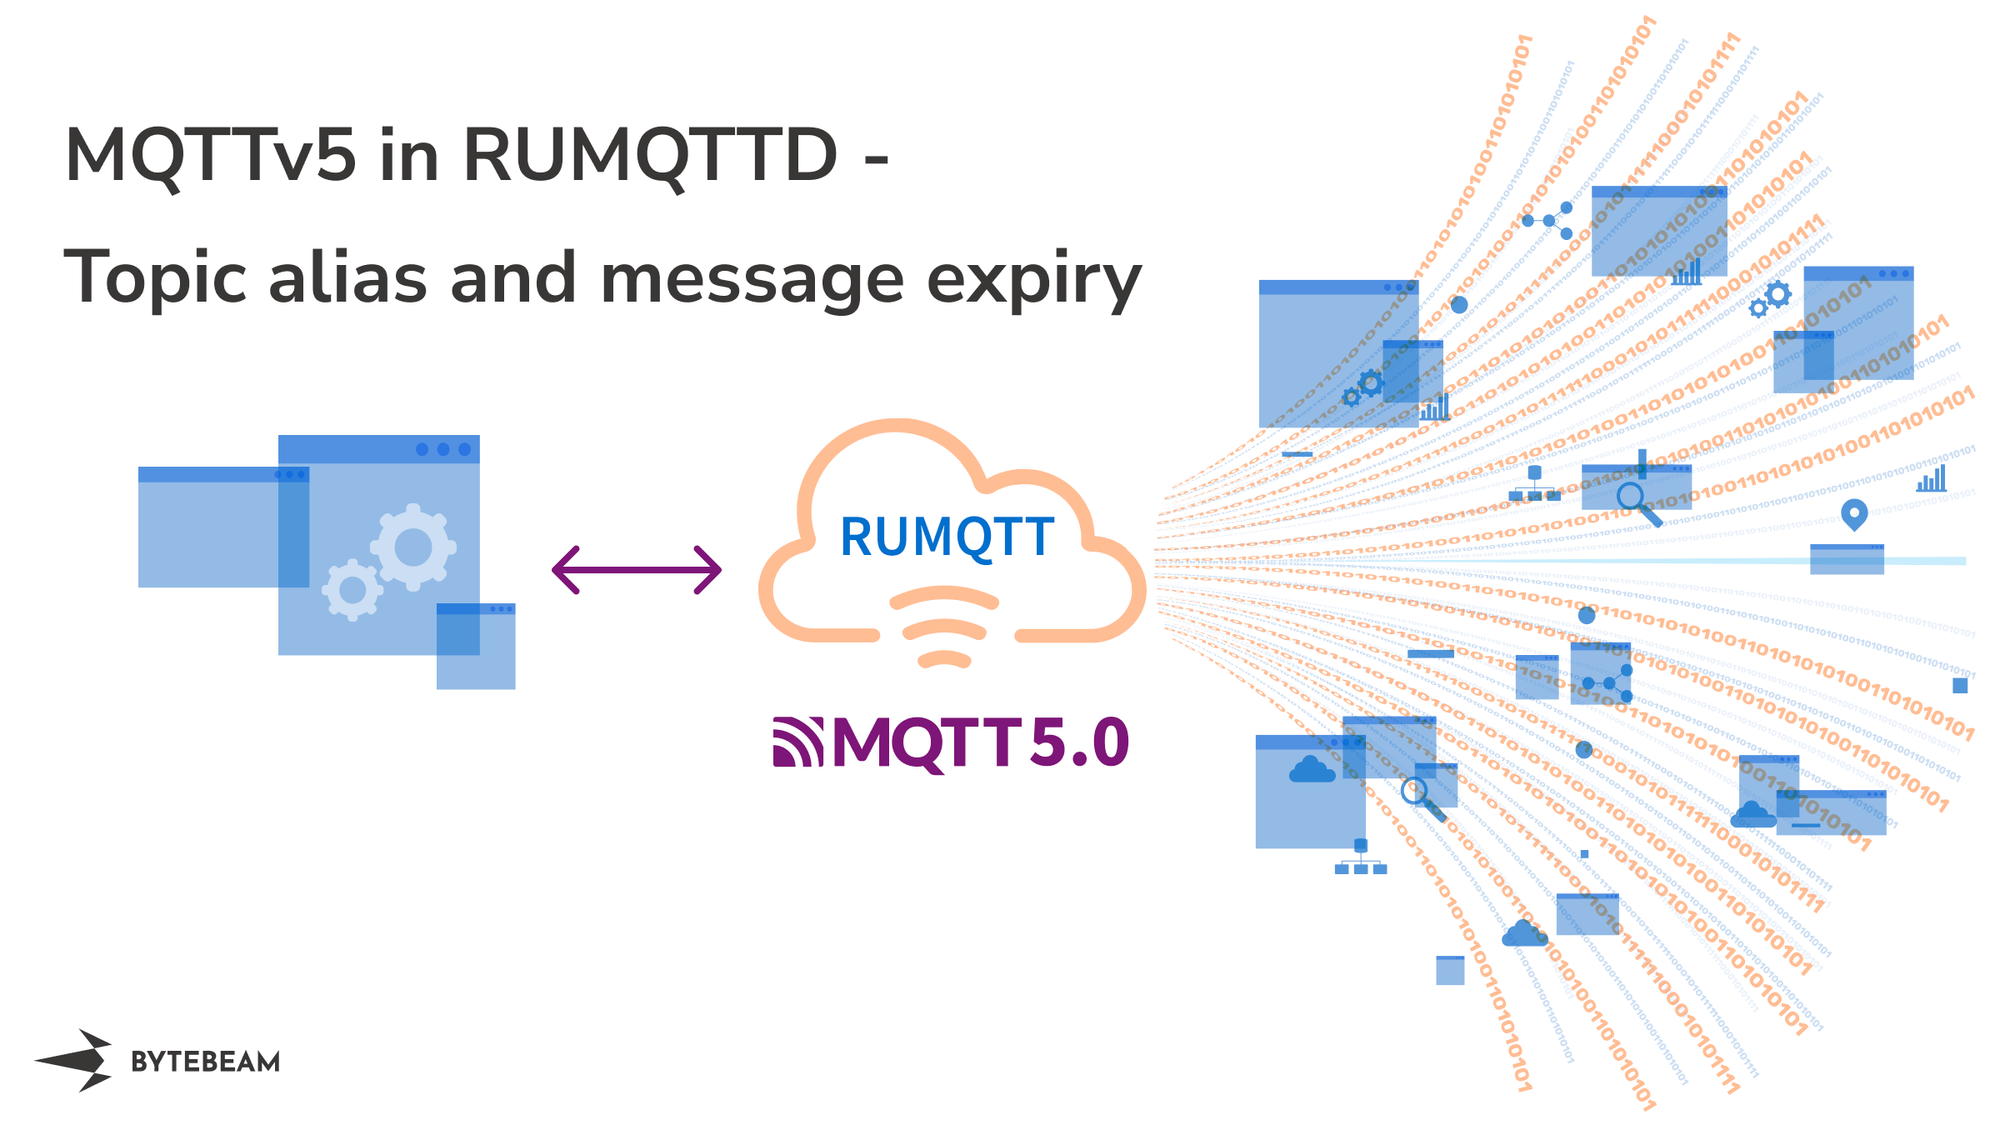 Rumqttd now supports MQTTv5 topic alias and message expiry